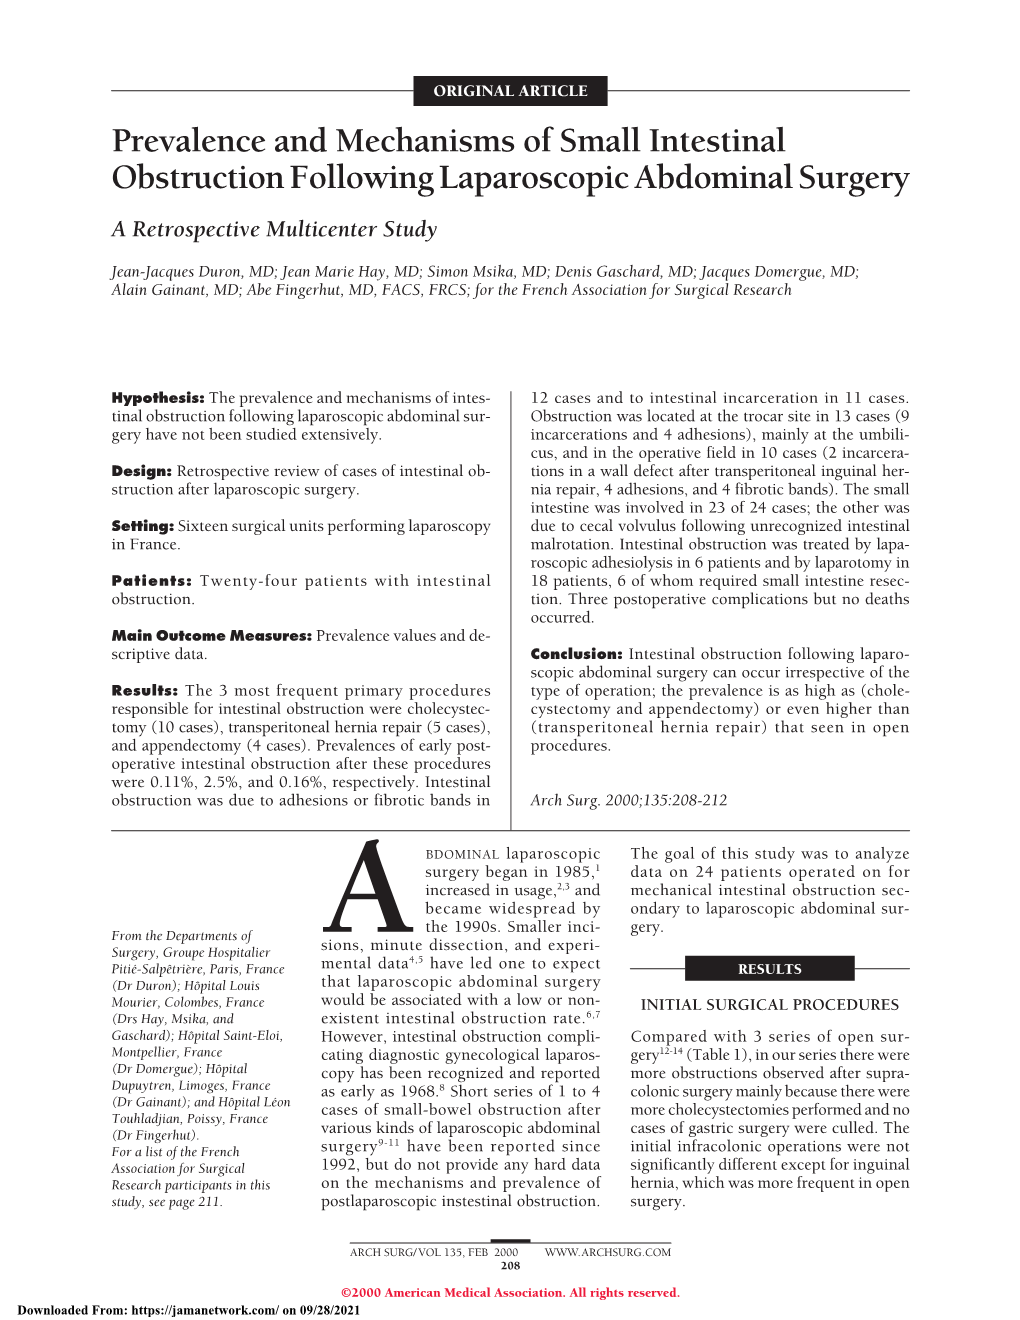 Prevalence and Mechanisms of Small Intestinal Obstruction Following Laparoscopic Abdominal Surgery a Retrospective Multicenter Study